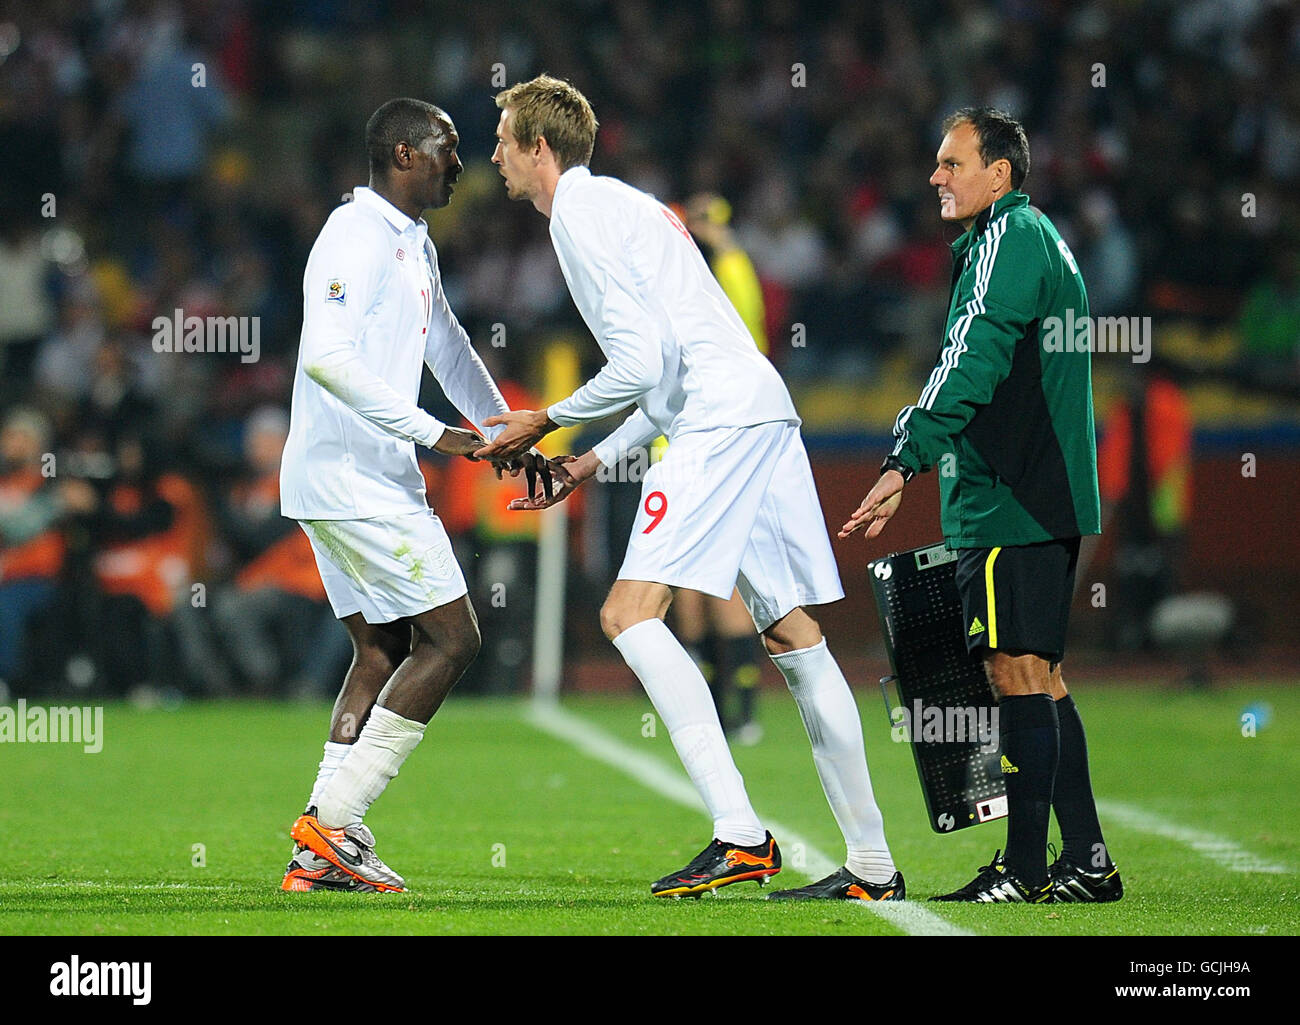 Soccer - 2010 FIFA World Cup South Africa - Group C - England v USA - Royal Bafokeng Stadium. England's Emile Heskey is replaced by Peter Crouch Stock Photo